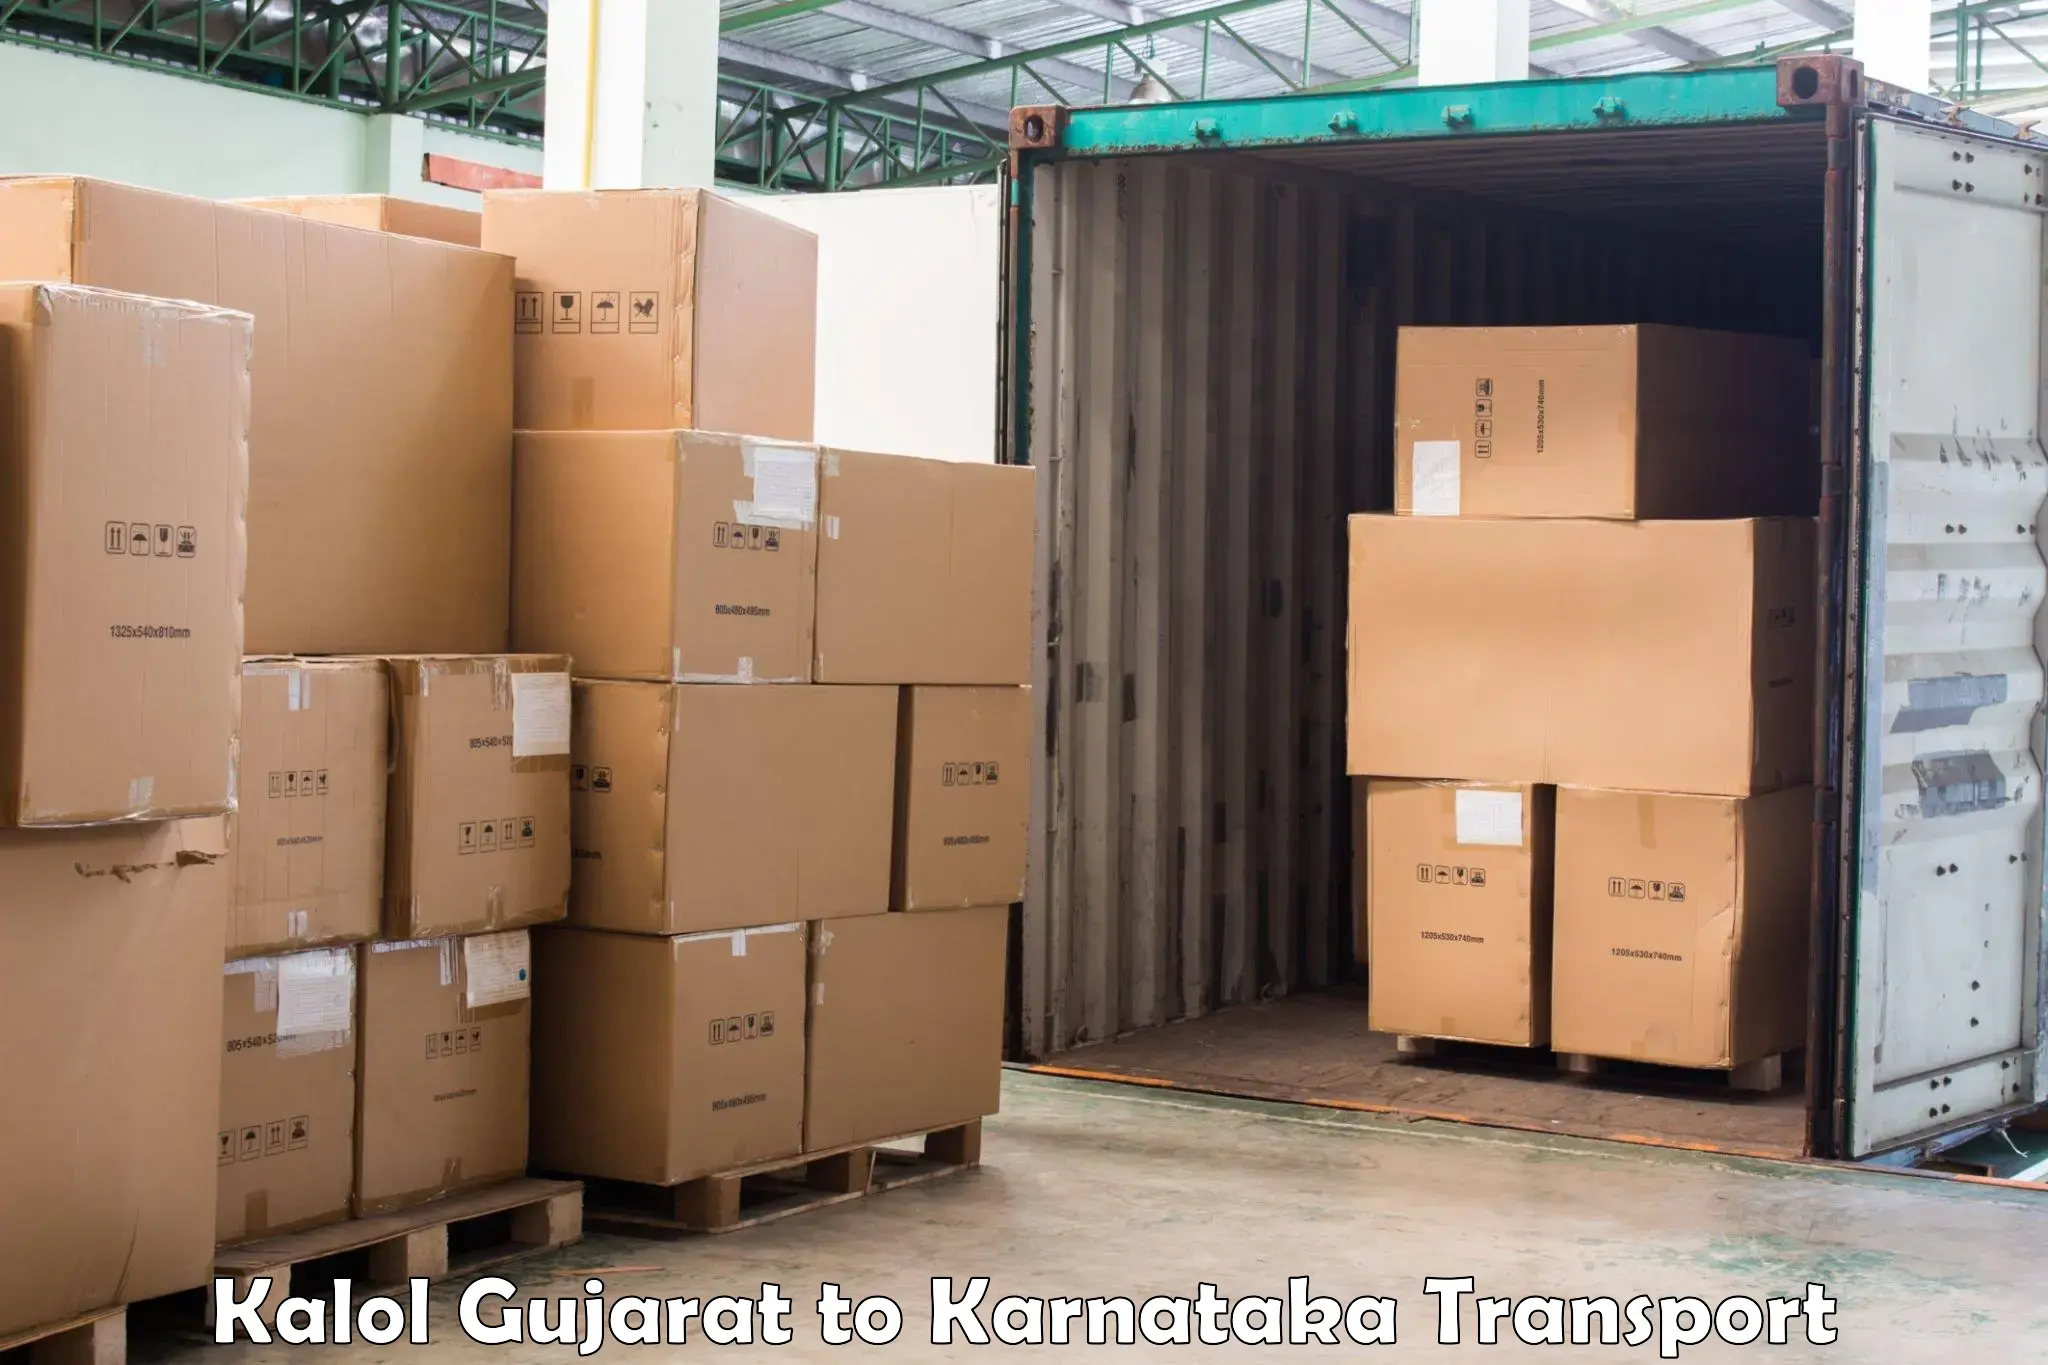 Cargo train transport services Kalol Gujarat to Manipal Academy of Higher Education